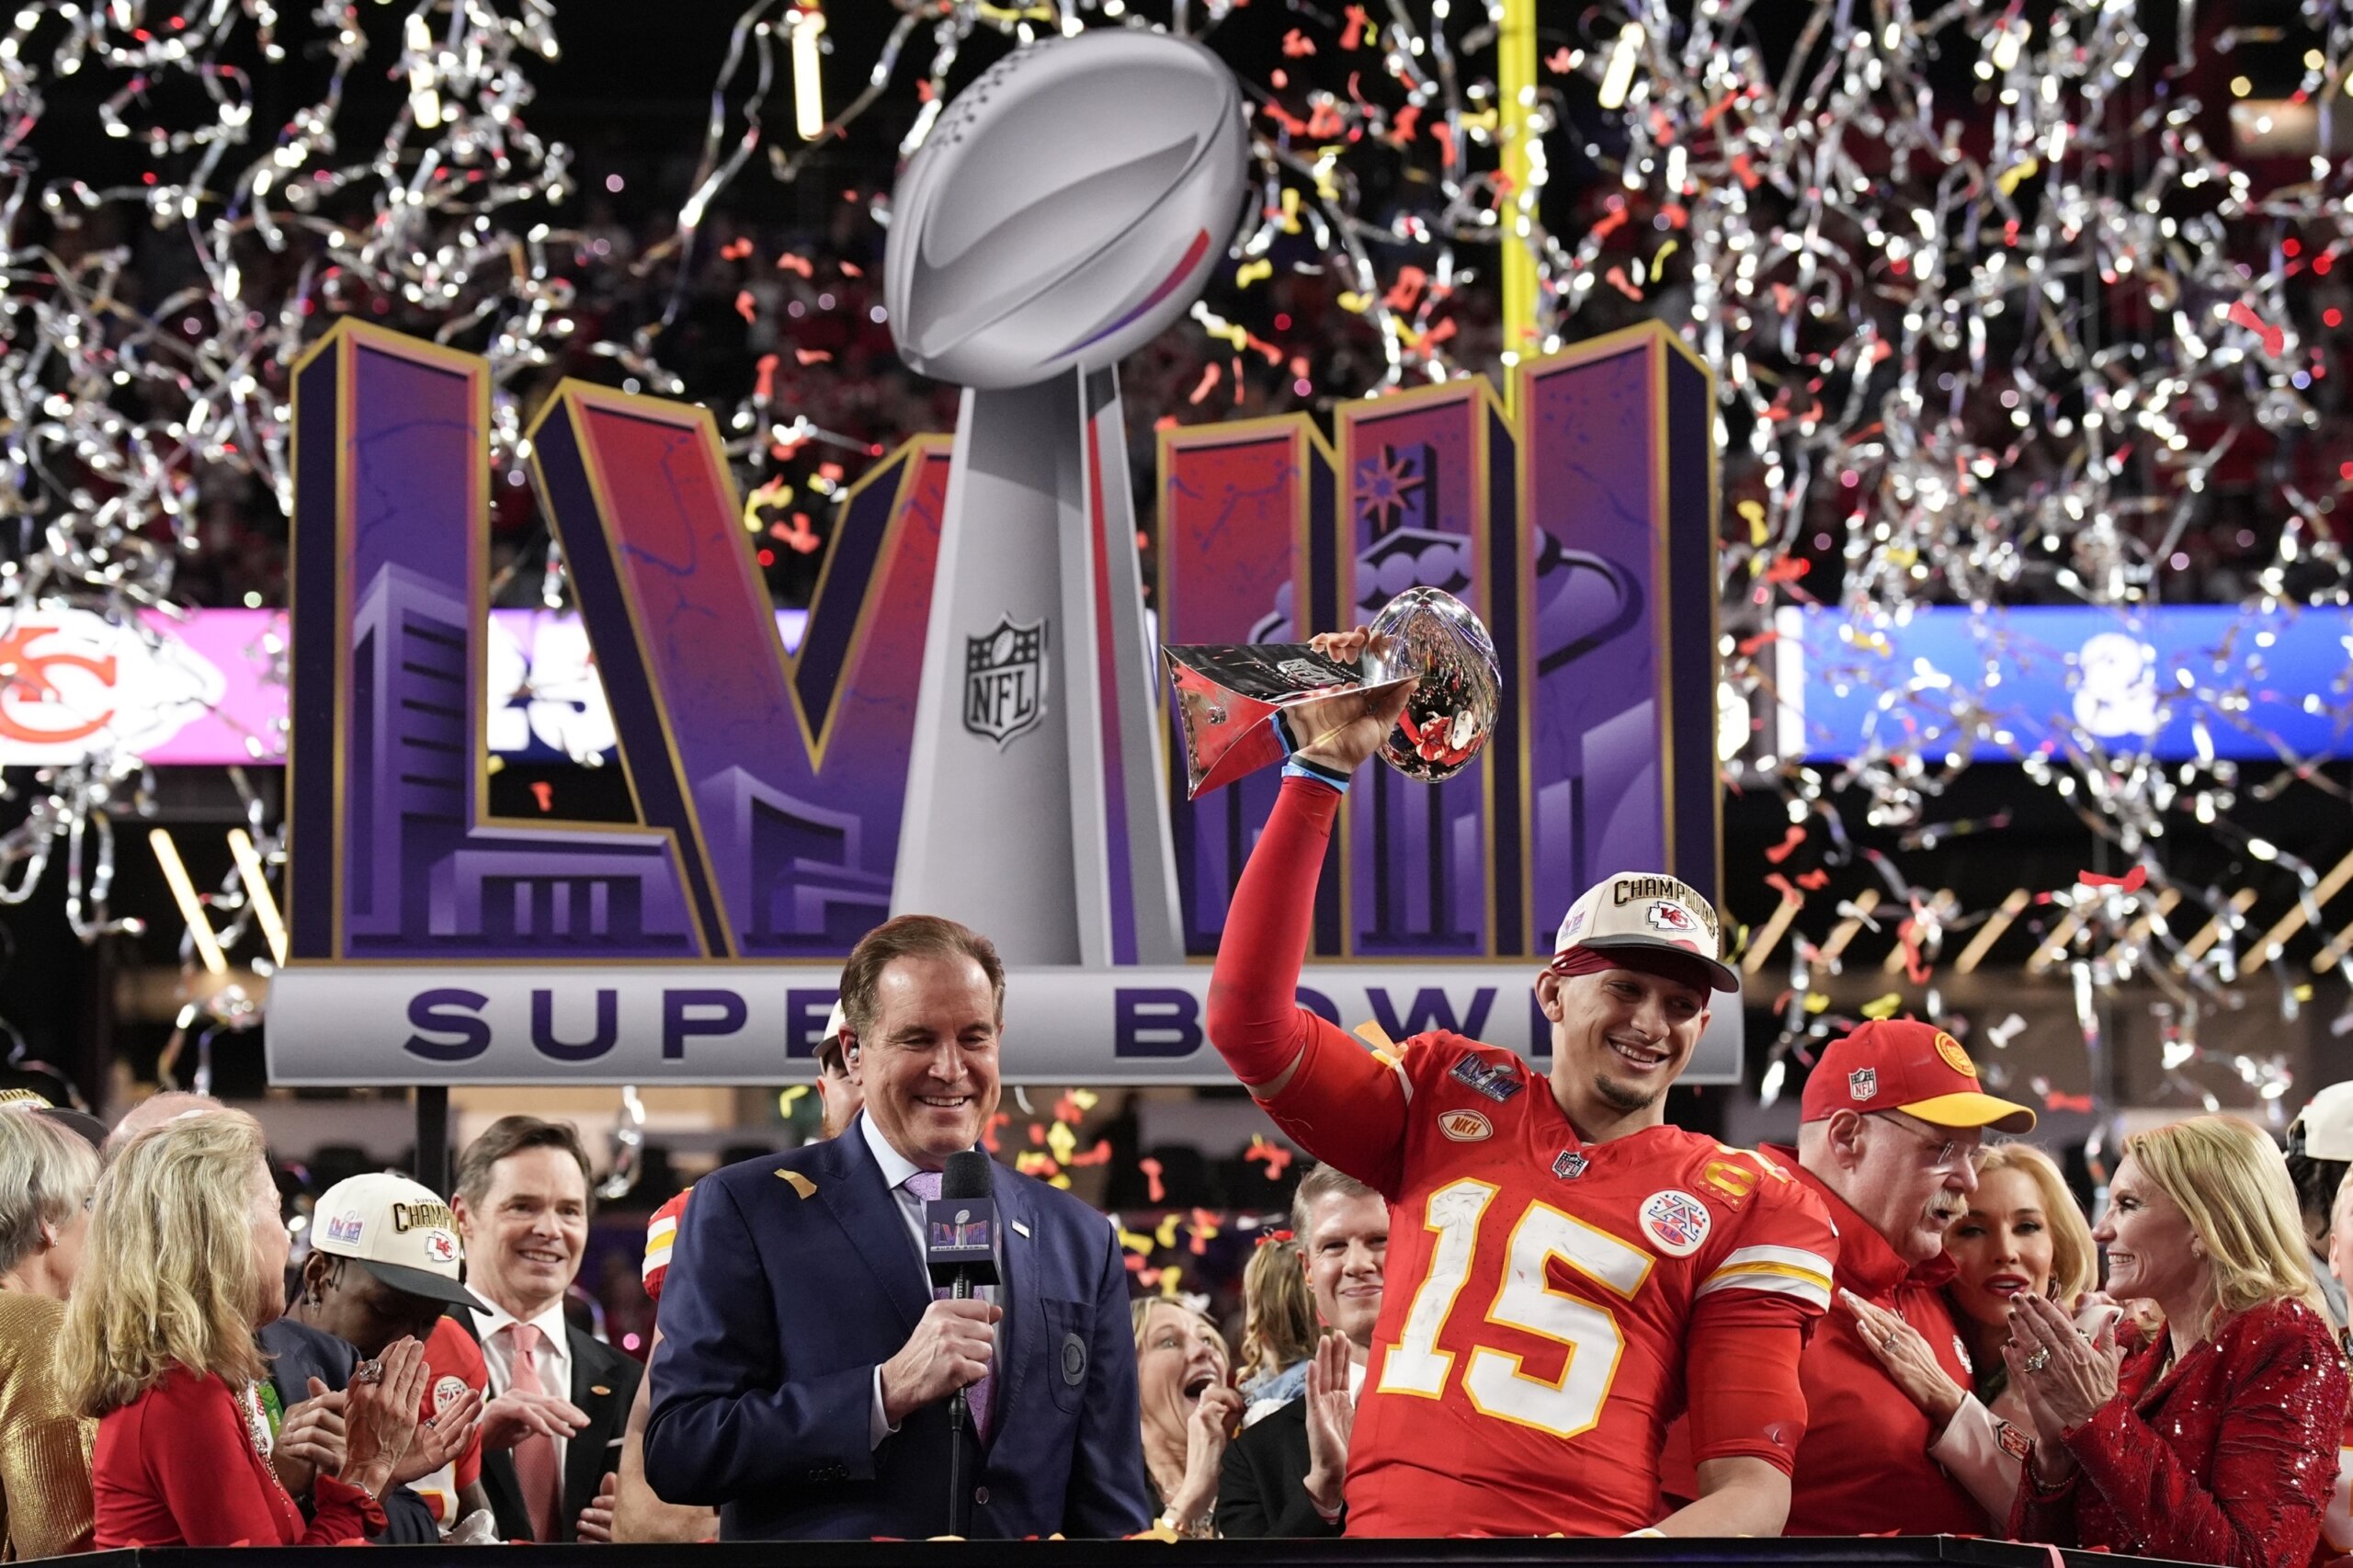 Super Bowl star Mahomes leads Chiefs to comeback 2522 win over 49ers